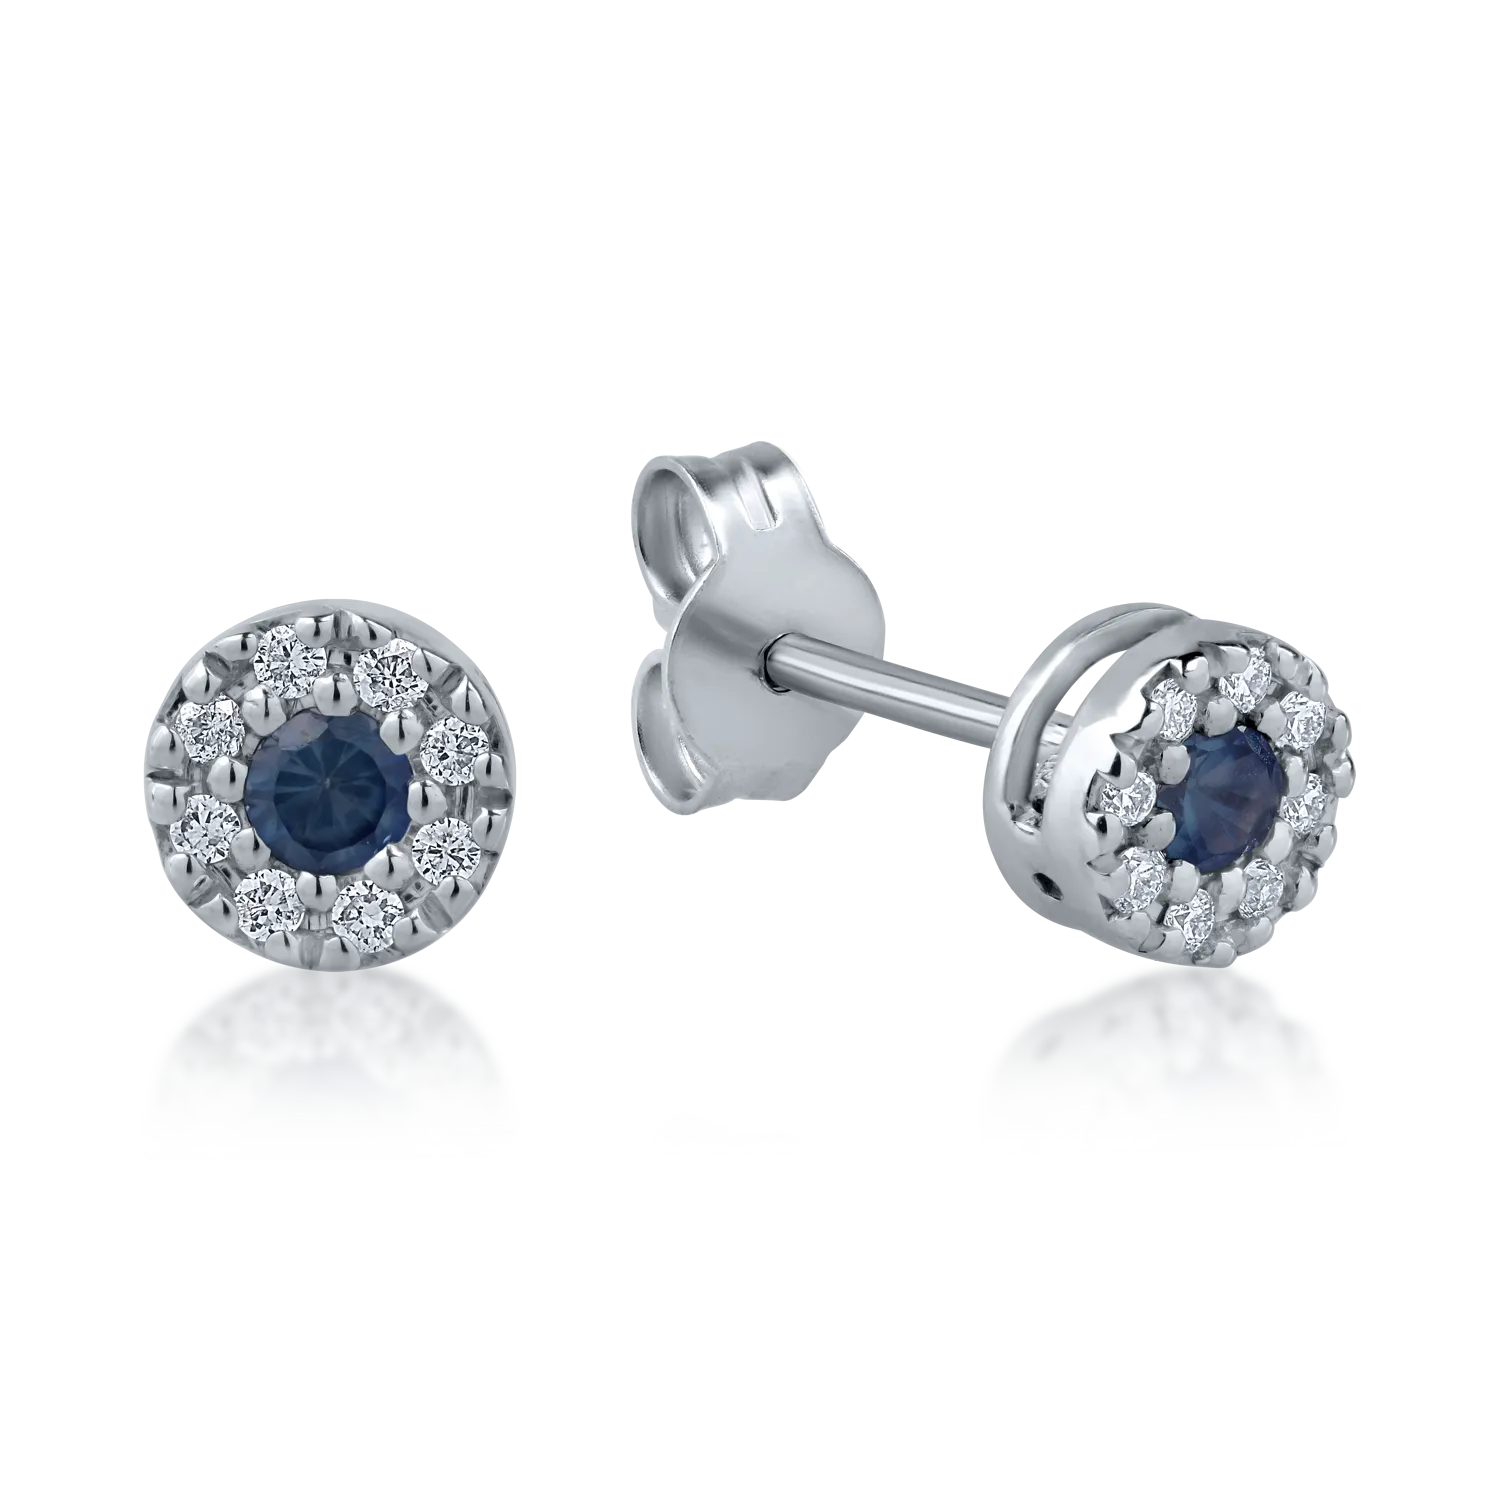 White gold earrings with 0.17ct sapphires and 0.08ct diamonds